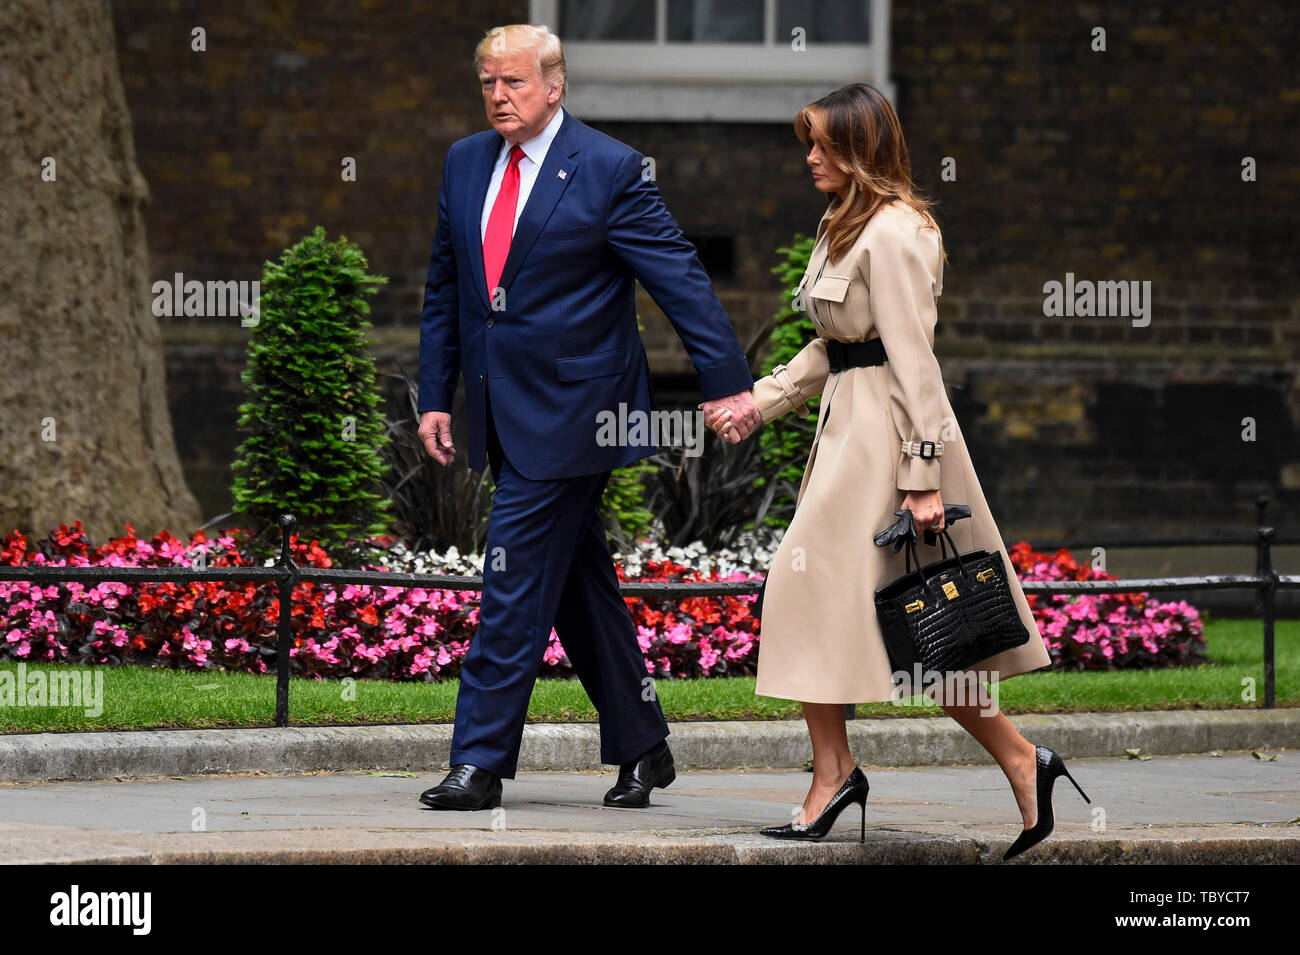 London, UK.  4 June 2019.  US President Donald Trump and Melania Trump arrive in Downing Street to meet outgoing Prime Minister Theresa May for talks, on day two of his three day State Visit to the UK.  Credit: Stephen Chung / Alamy Live News Stock Photo